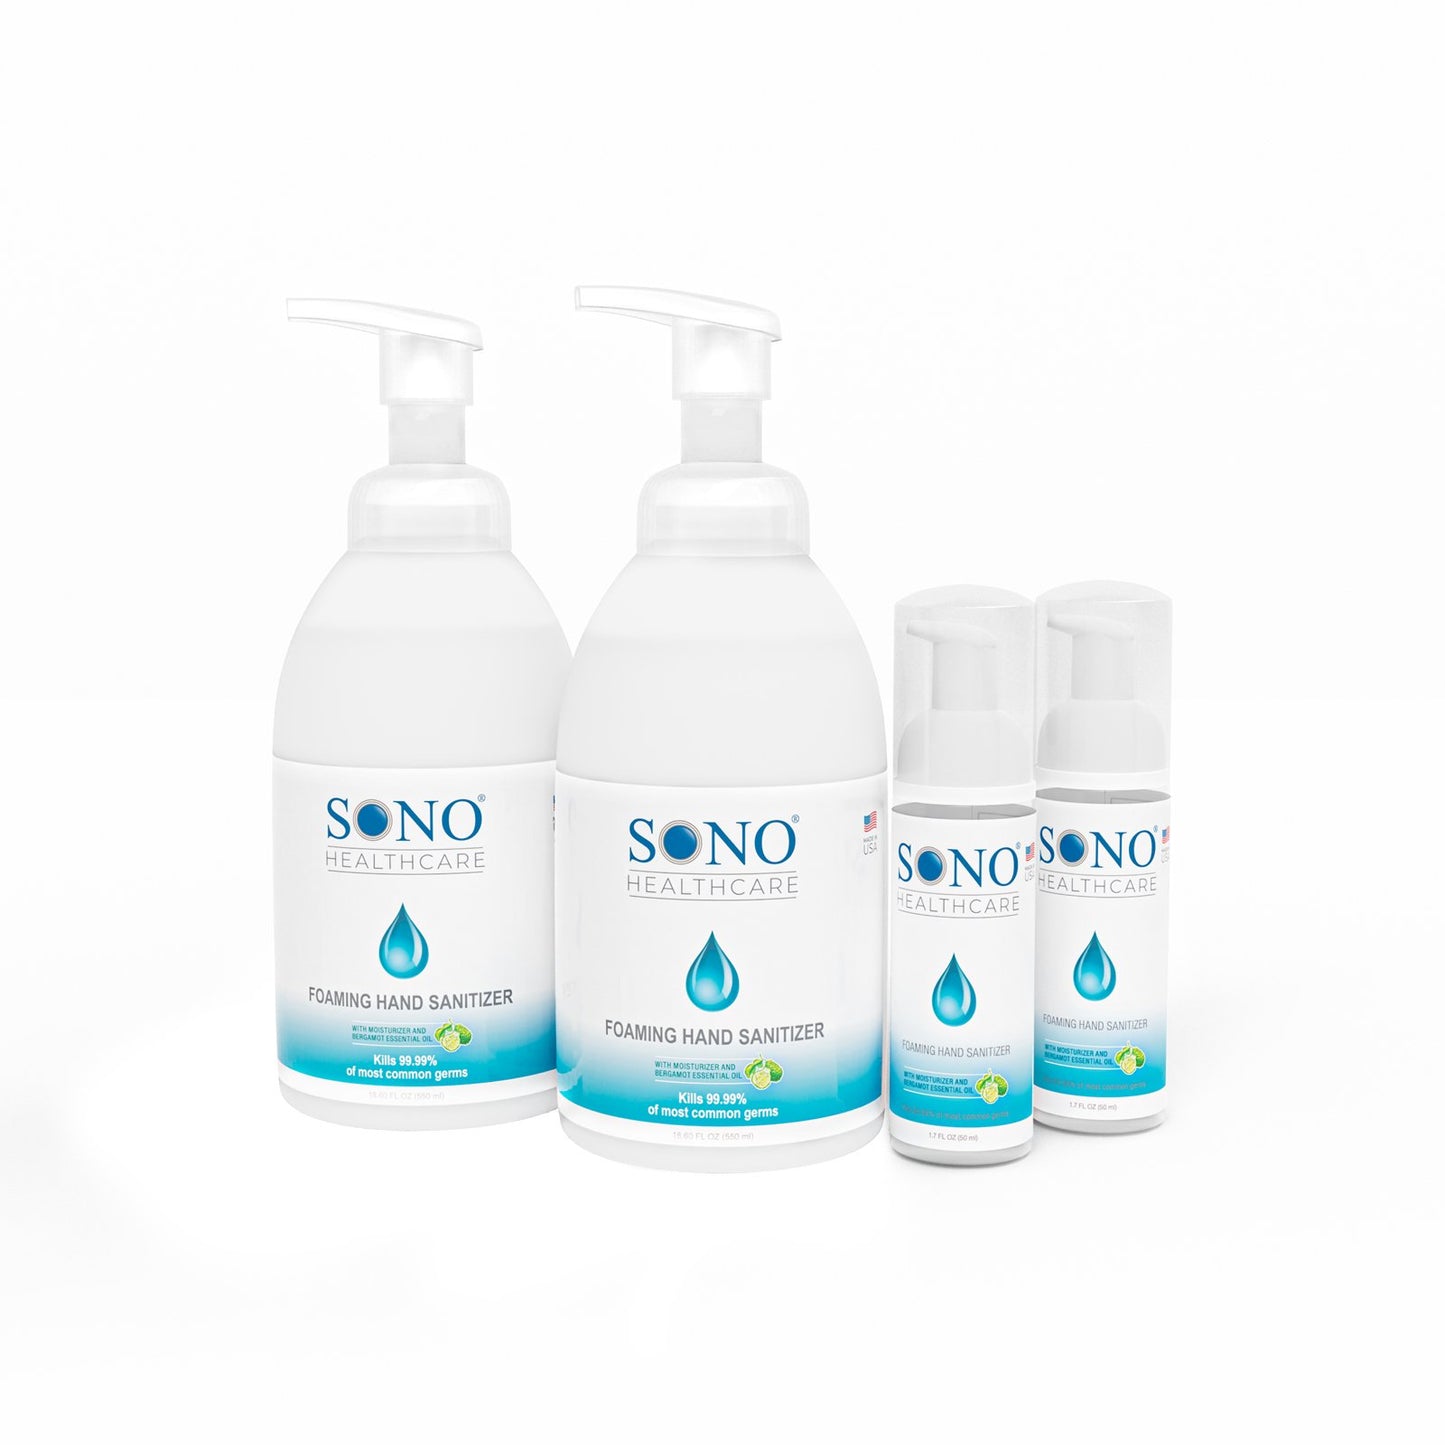 Double Twin Hand Sanitizer Kit